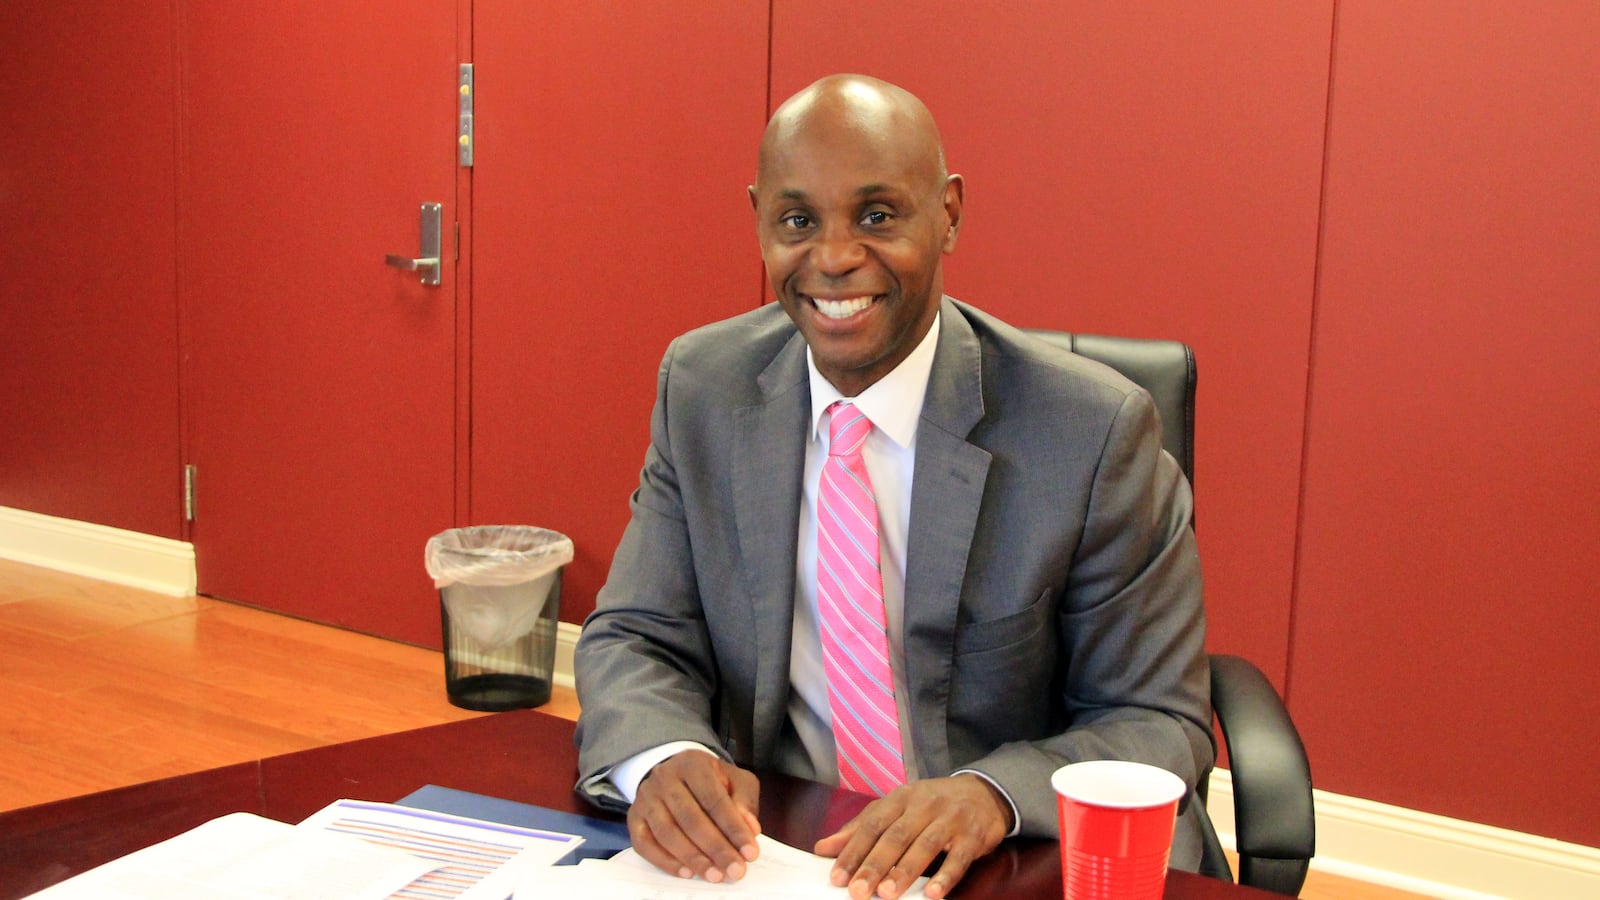 Superintendent Dorsey Hopson has overseen Tennessee's largest public school district since 2013.